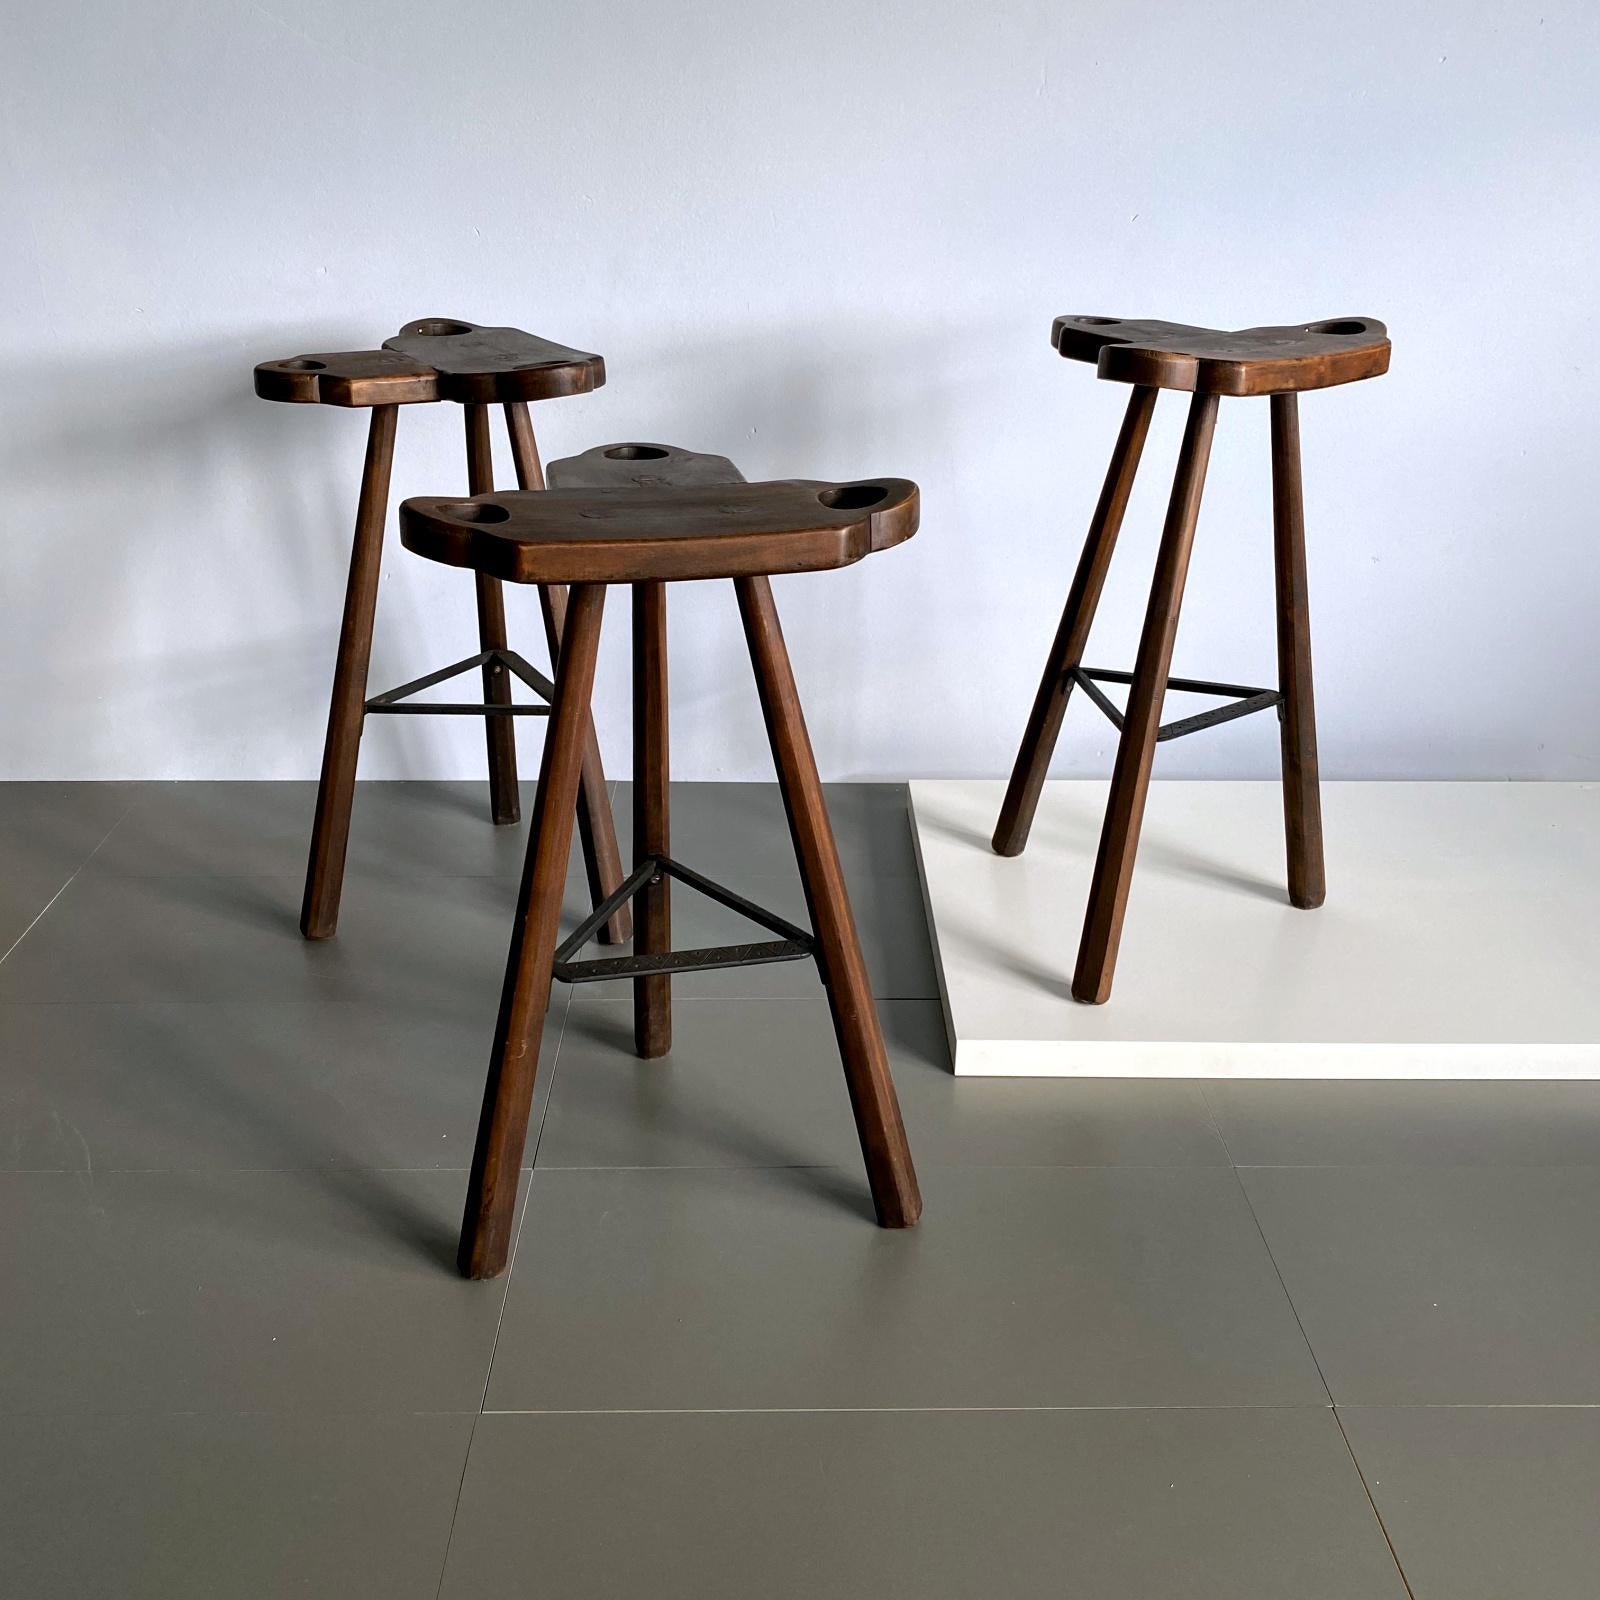 Three midcentury Marbella bar stools in stained oak wood with black steel patterned footrests. The curved T-shape seat makes the seating very comfortable. The three handles are very functional for moving on and off.

Measurements: 
H 77 cm / 30.3